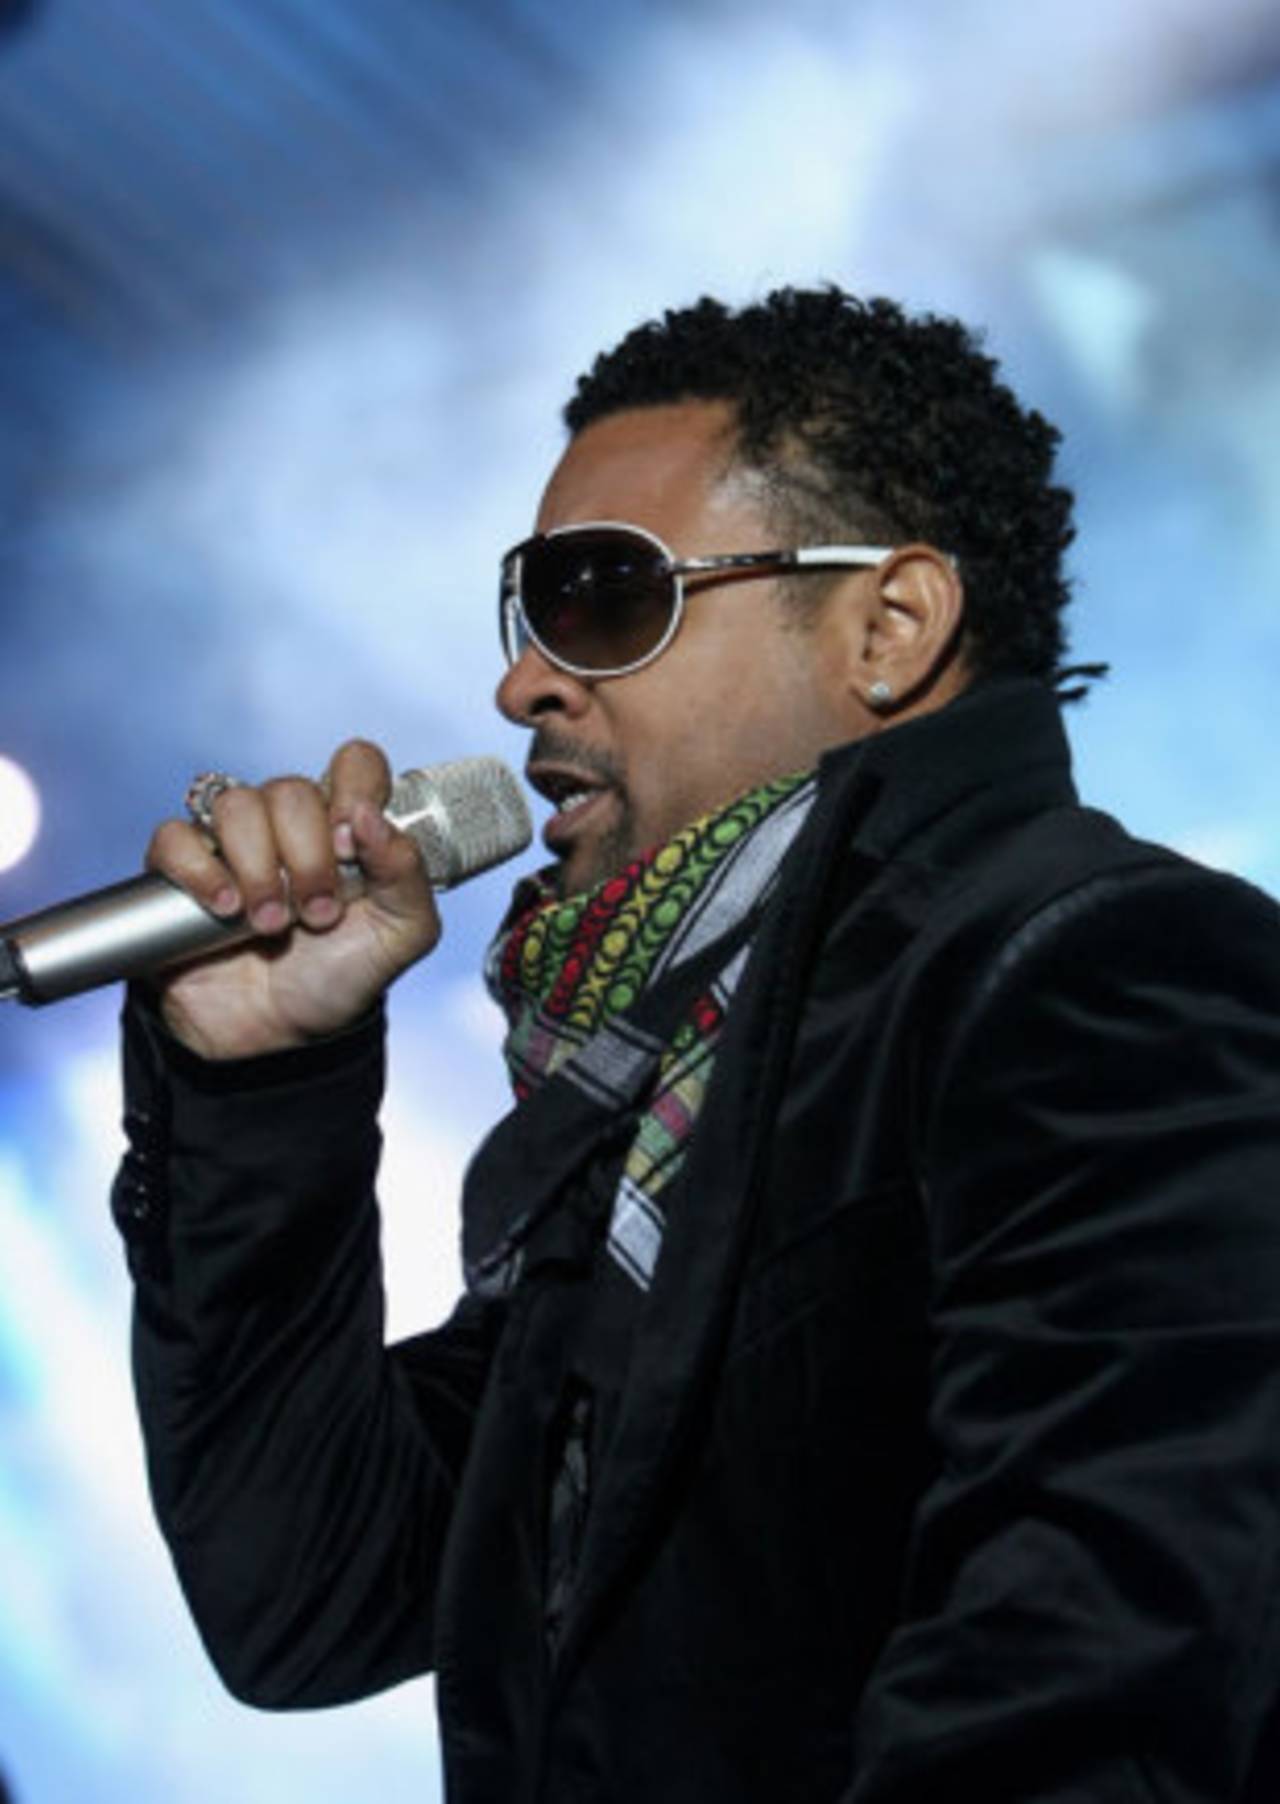 Reggae singer Shaggy performs in Cologne, Germany, June 6, 2009